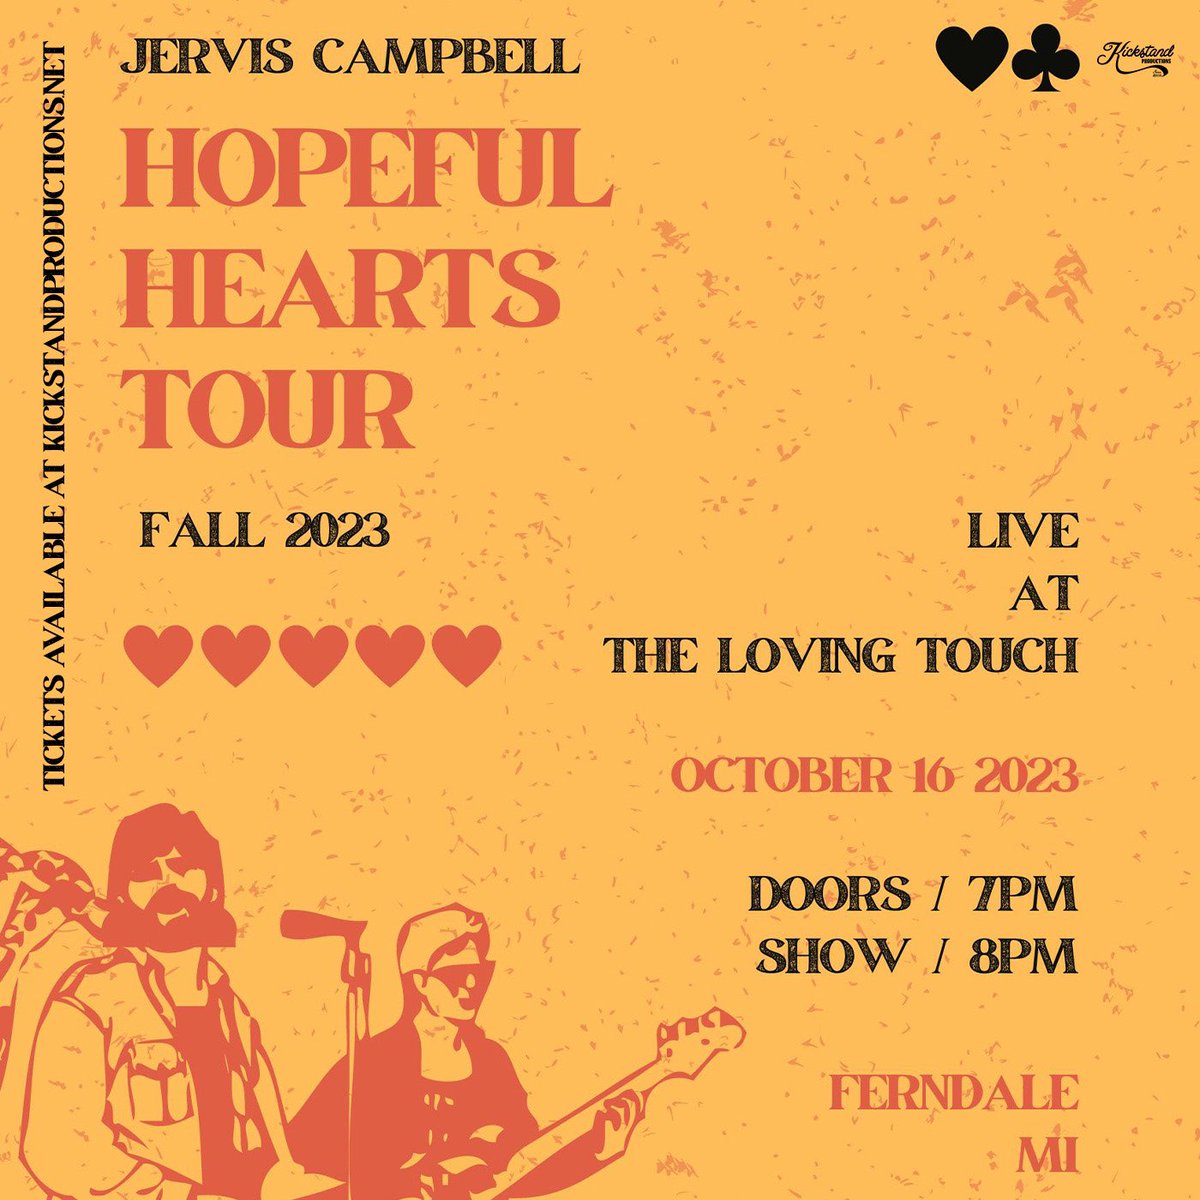 NEW SHOW! October 16th at The Loving Touch! Jervis Campbell Tickets on sale Friday at 11am